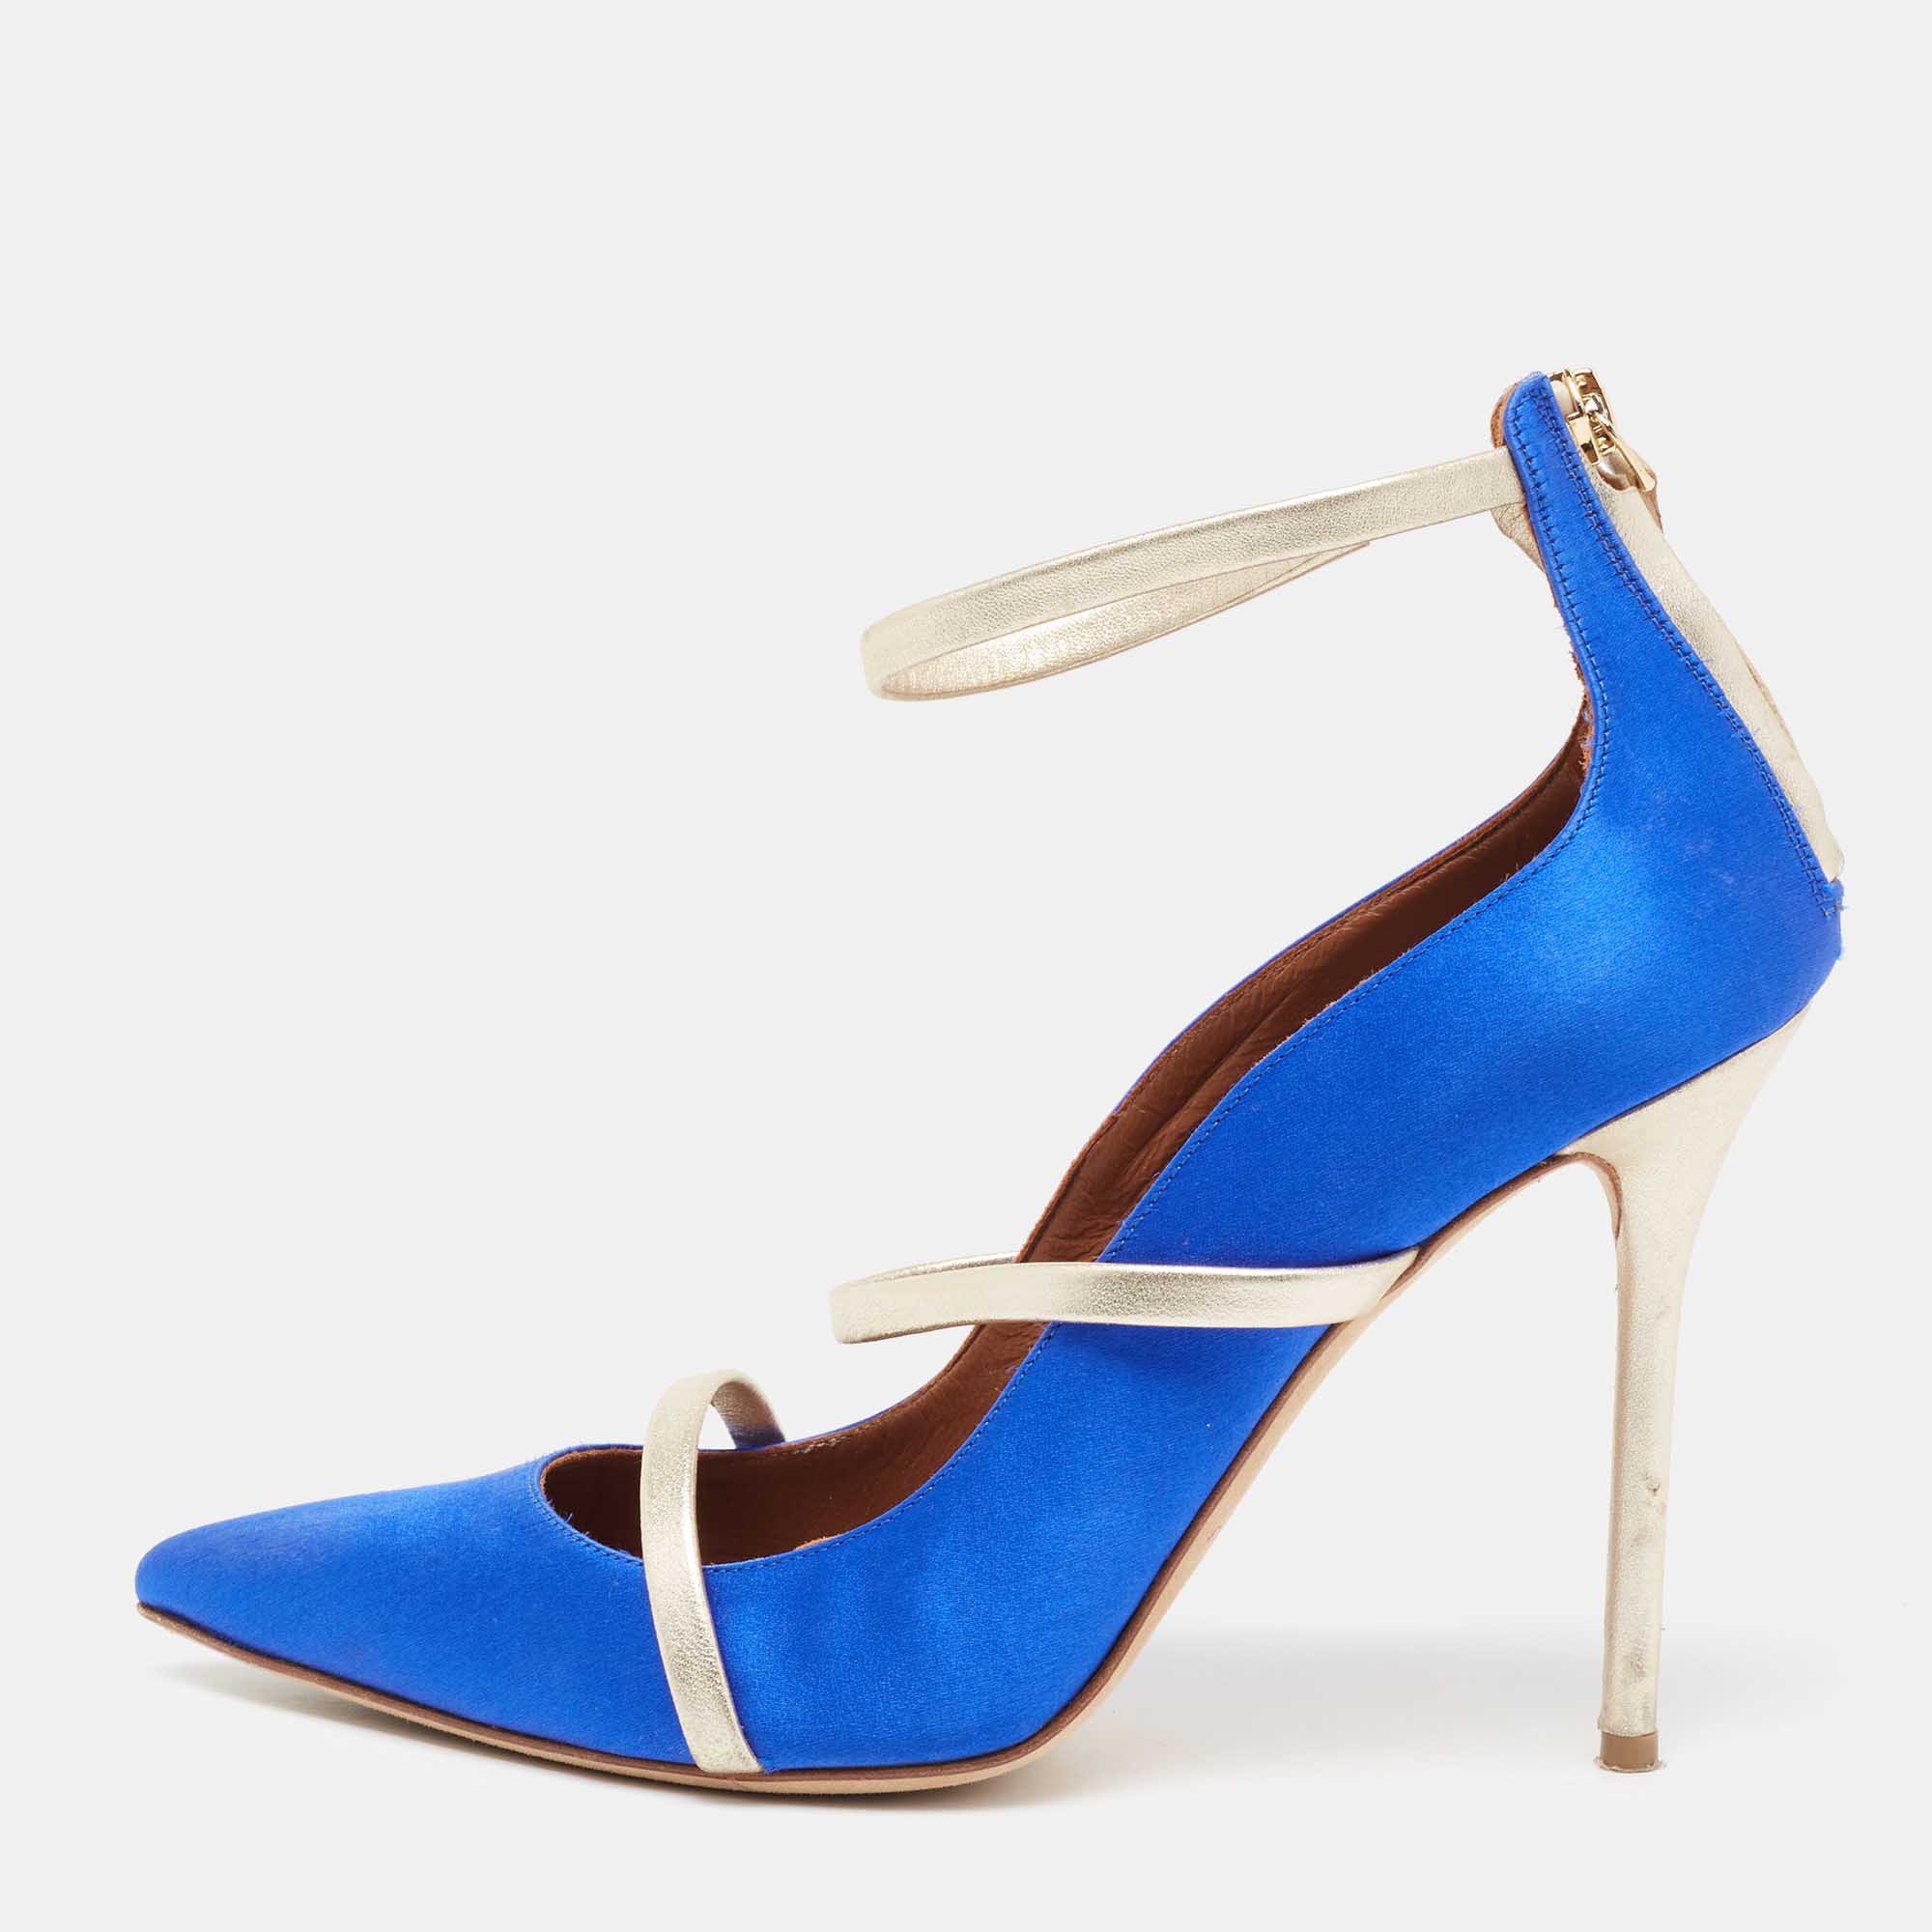 Pre-owned Malone Souliers Royal Blue/gold Satin And Leather Robyn Ankle-strap Pumps Size 41